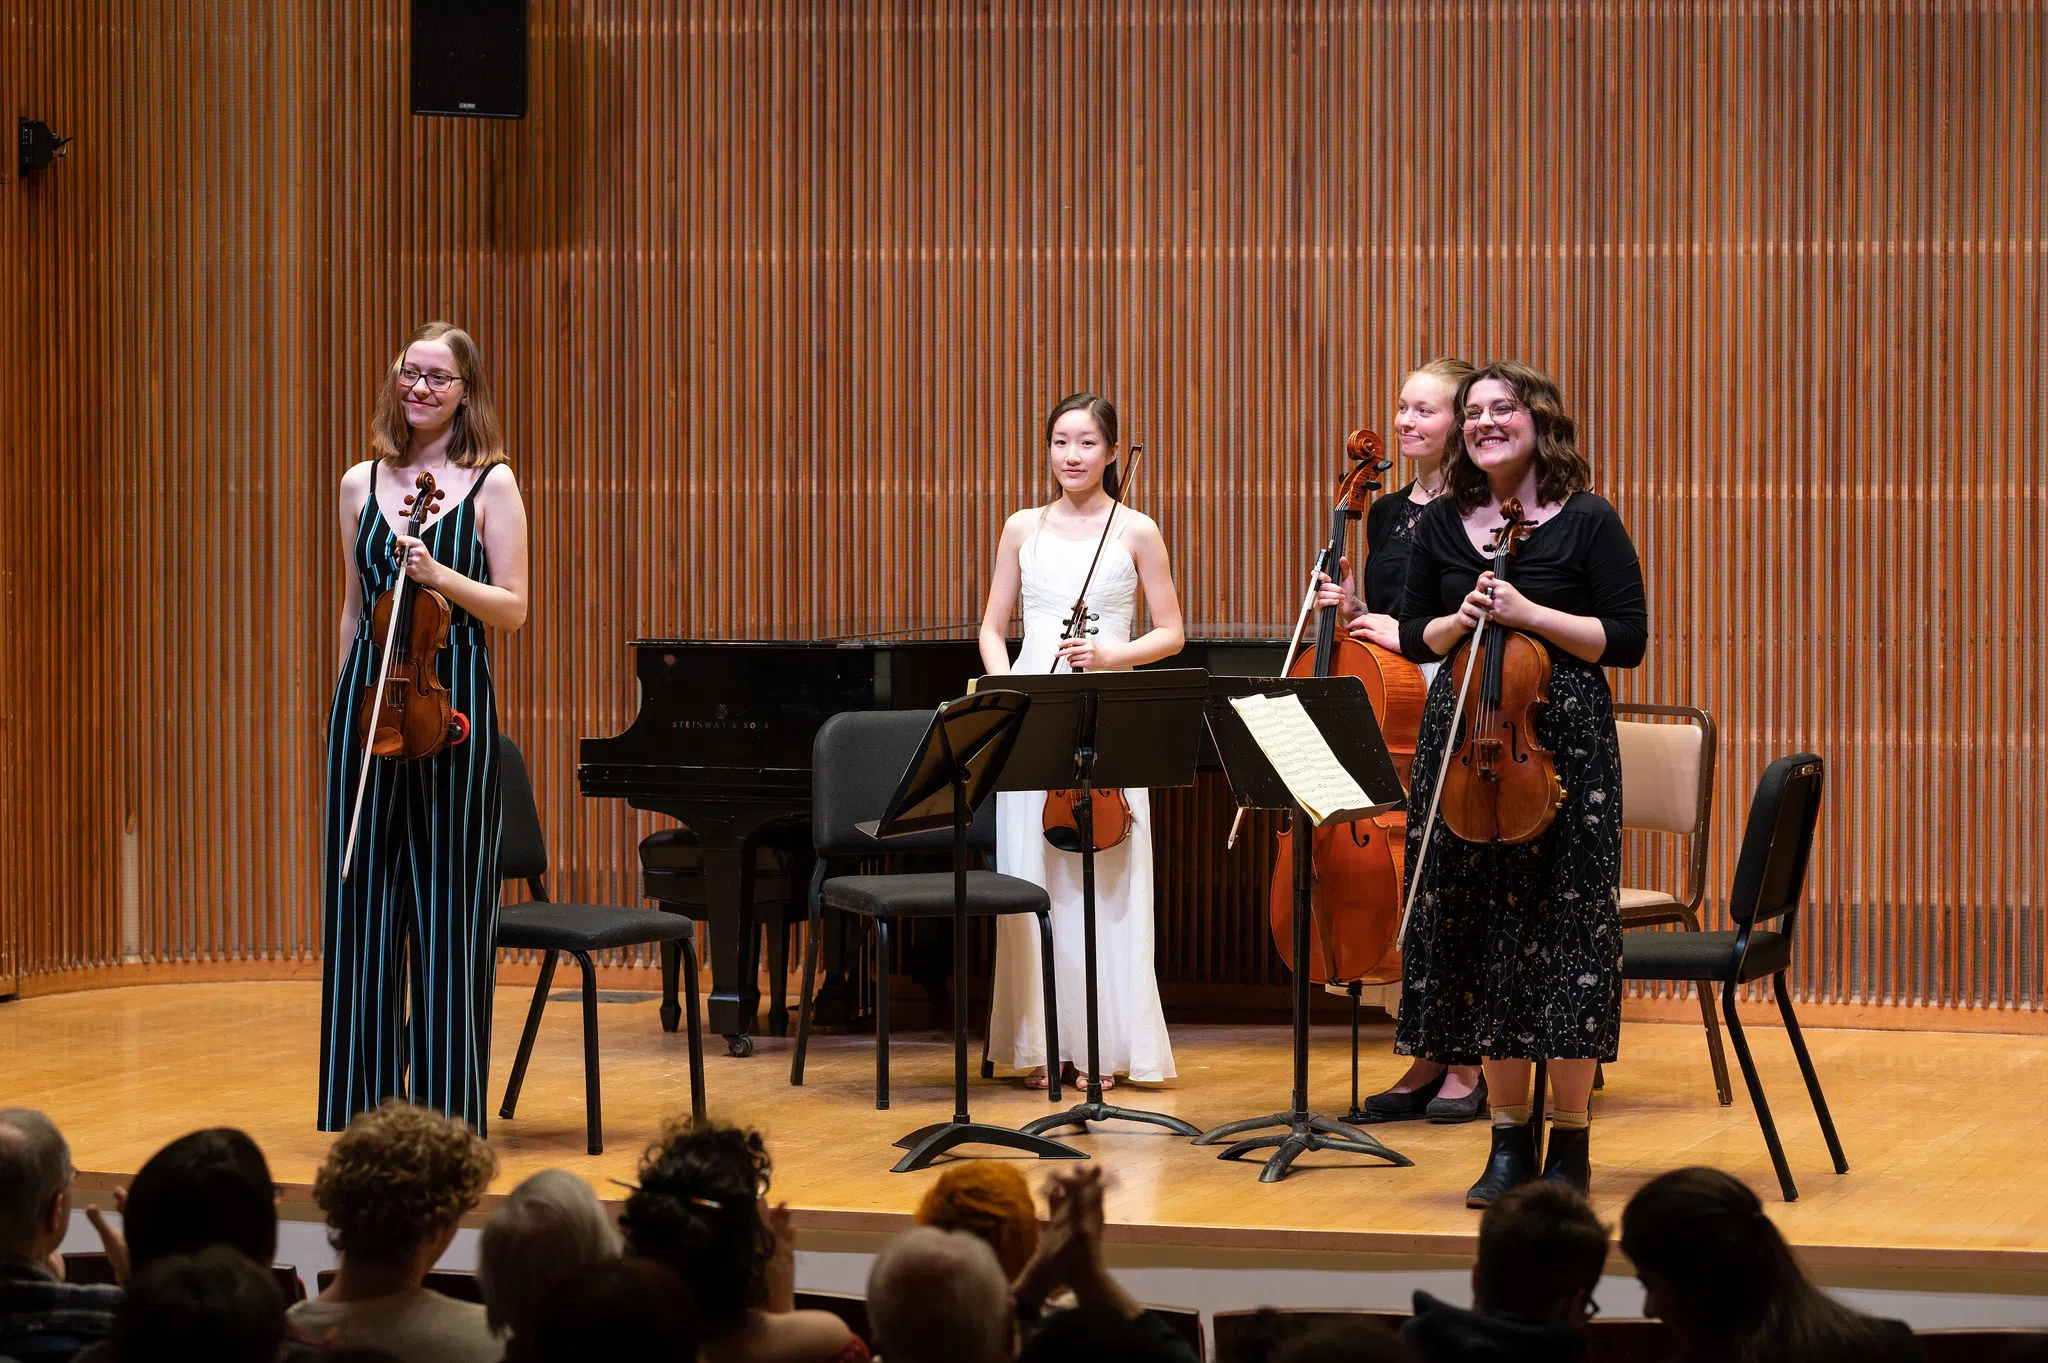 Four students holding stringed instruments stand before an audience on a stage.